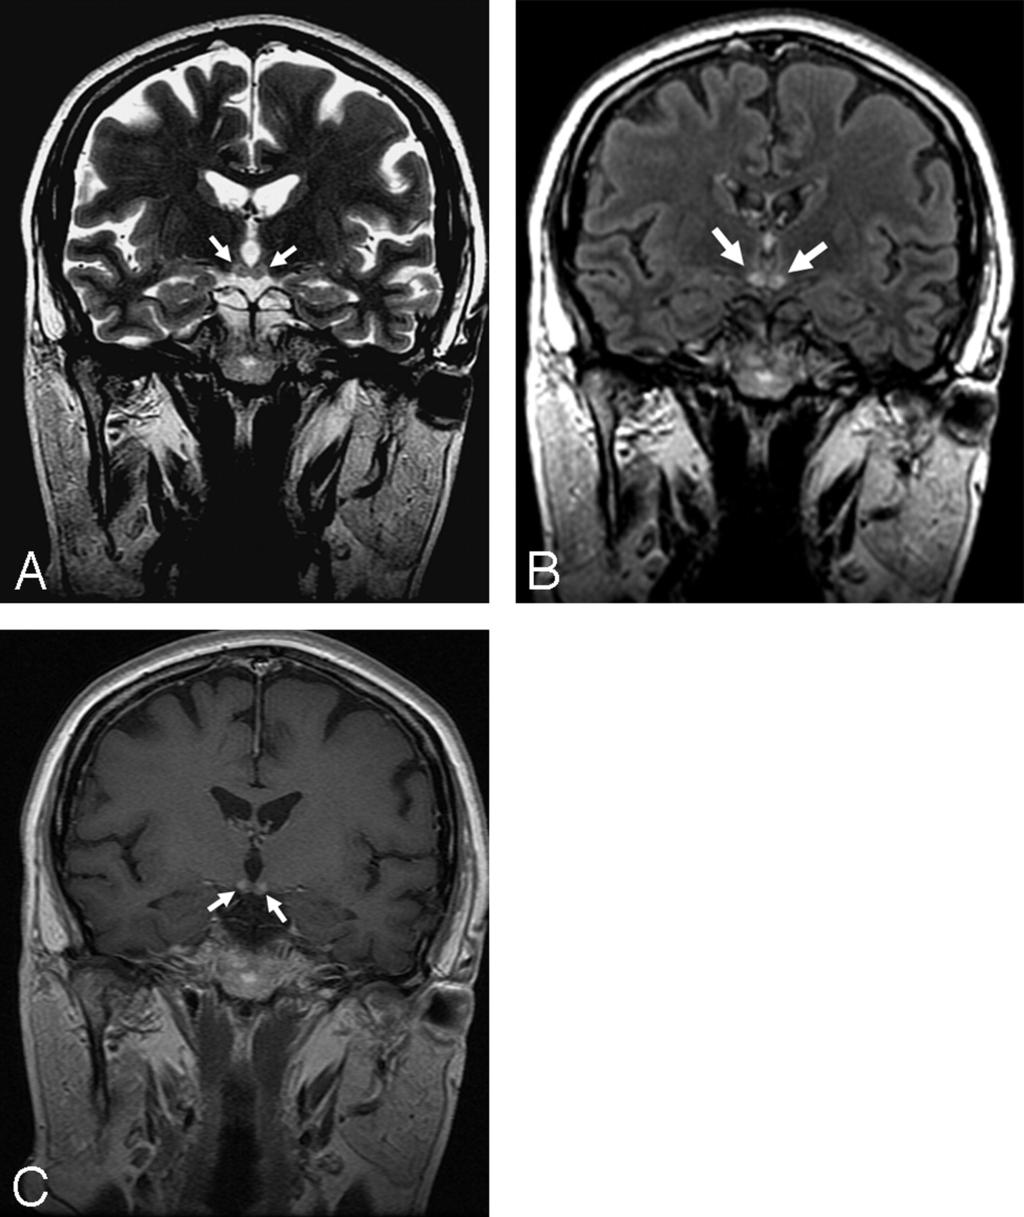 A 53-year-old woman with an history of chronic alcohol abuse presented with the classic neurologic triad of